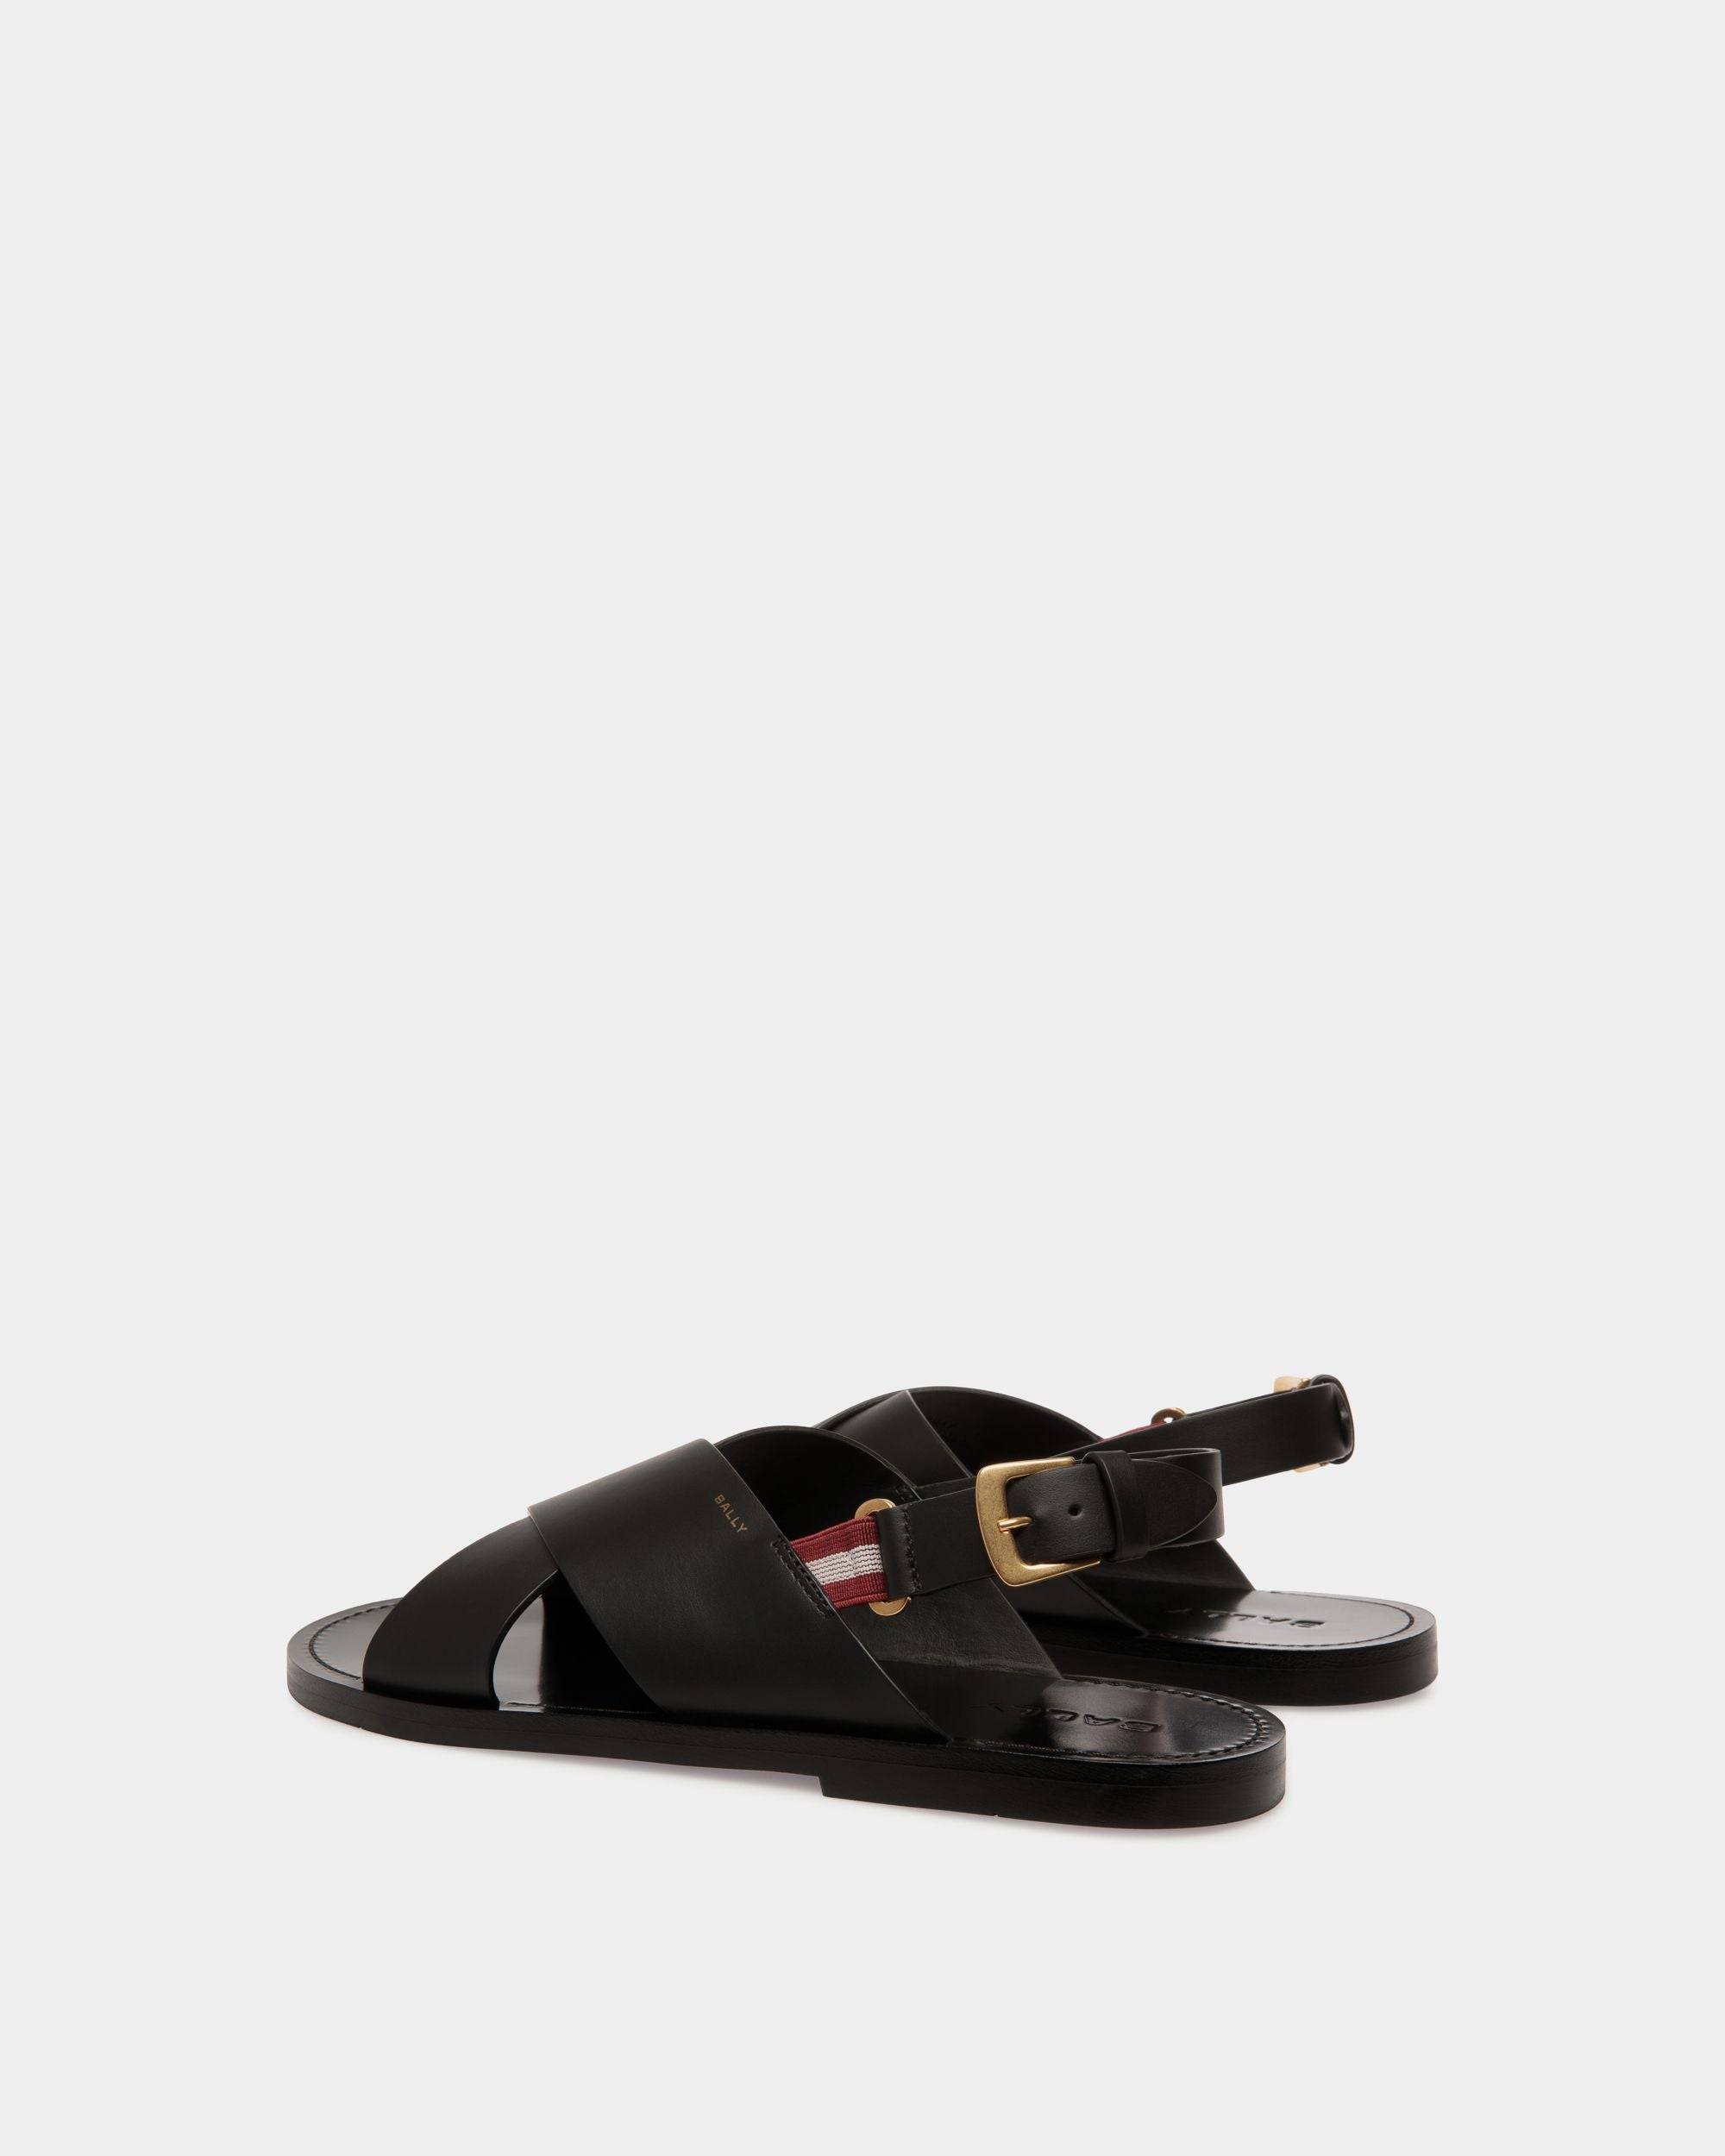 Chateau Sandal in Black Leather - Men's - Bally - 04